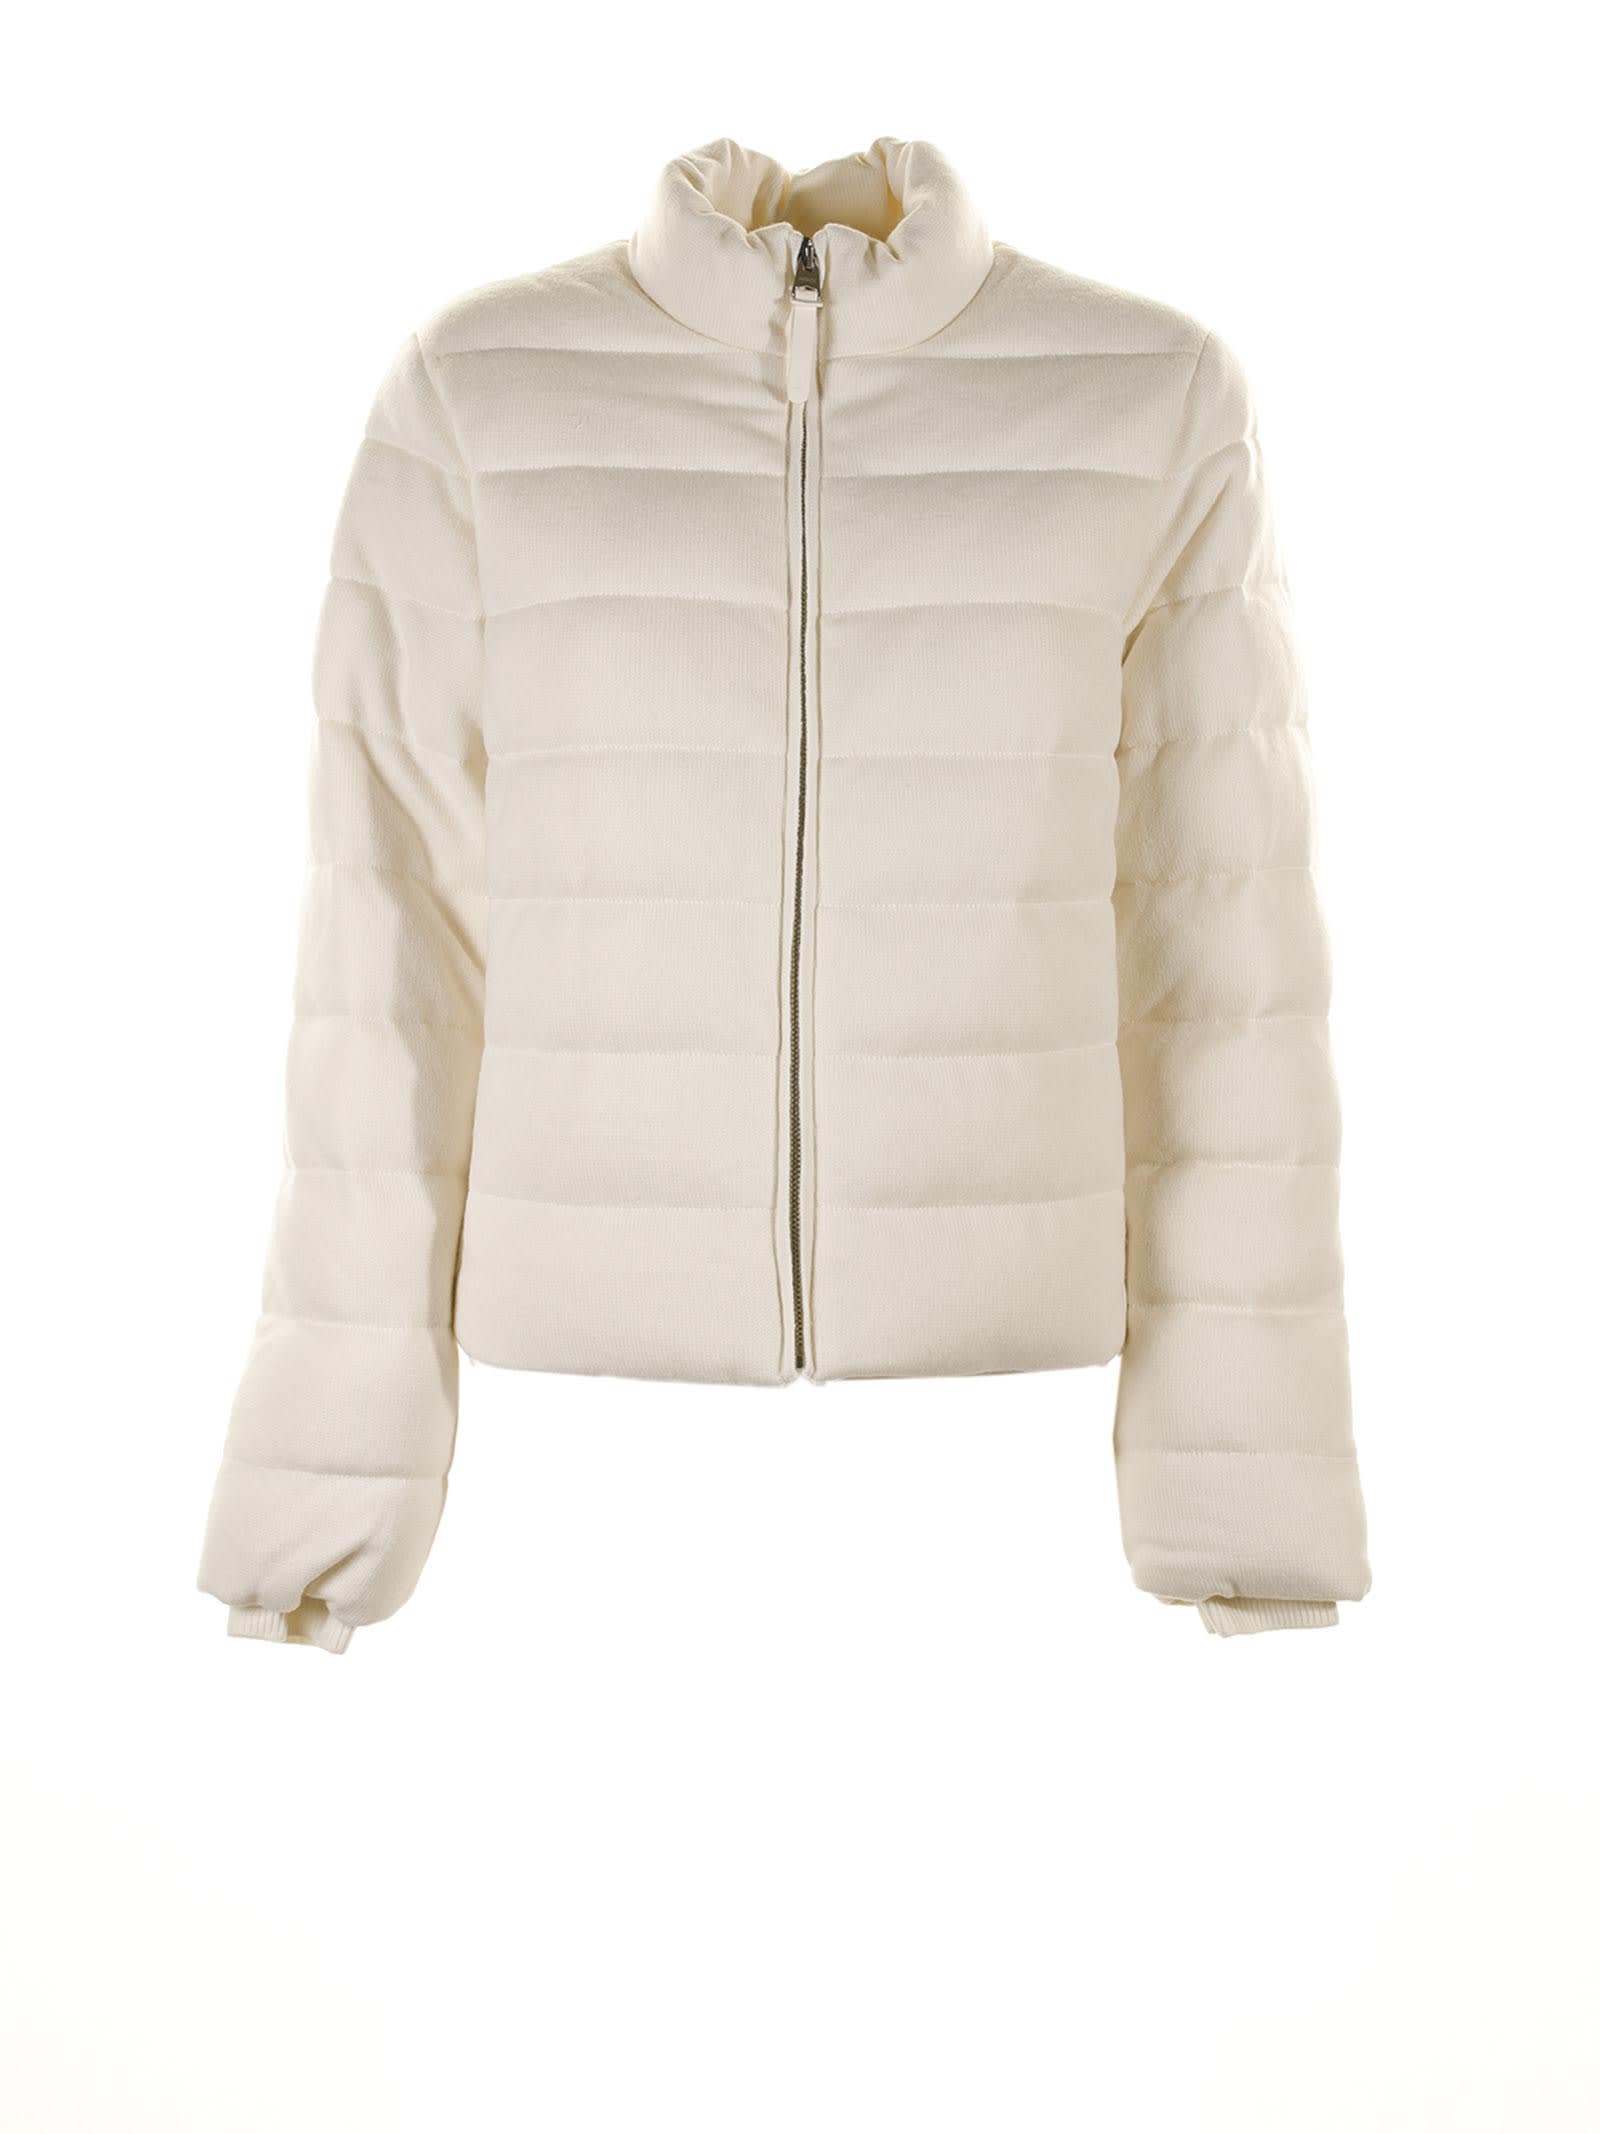 MACKAGE MELIA DOWN JACKET IN CASHMERE BLEND WITH COLLAR